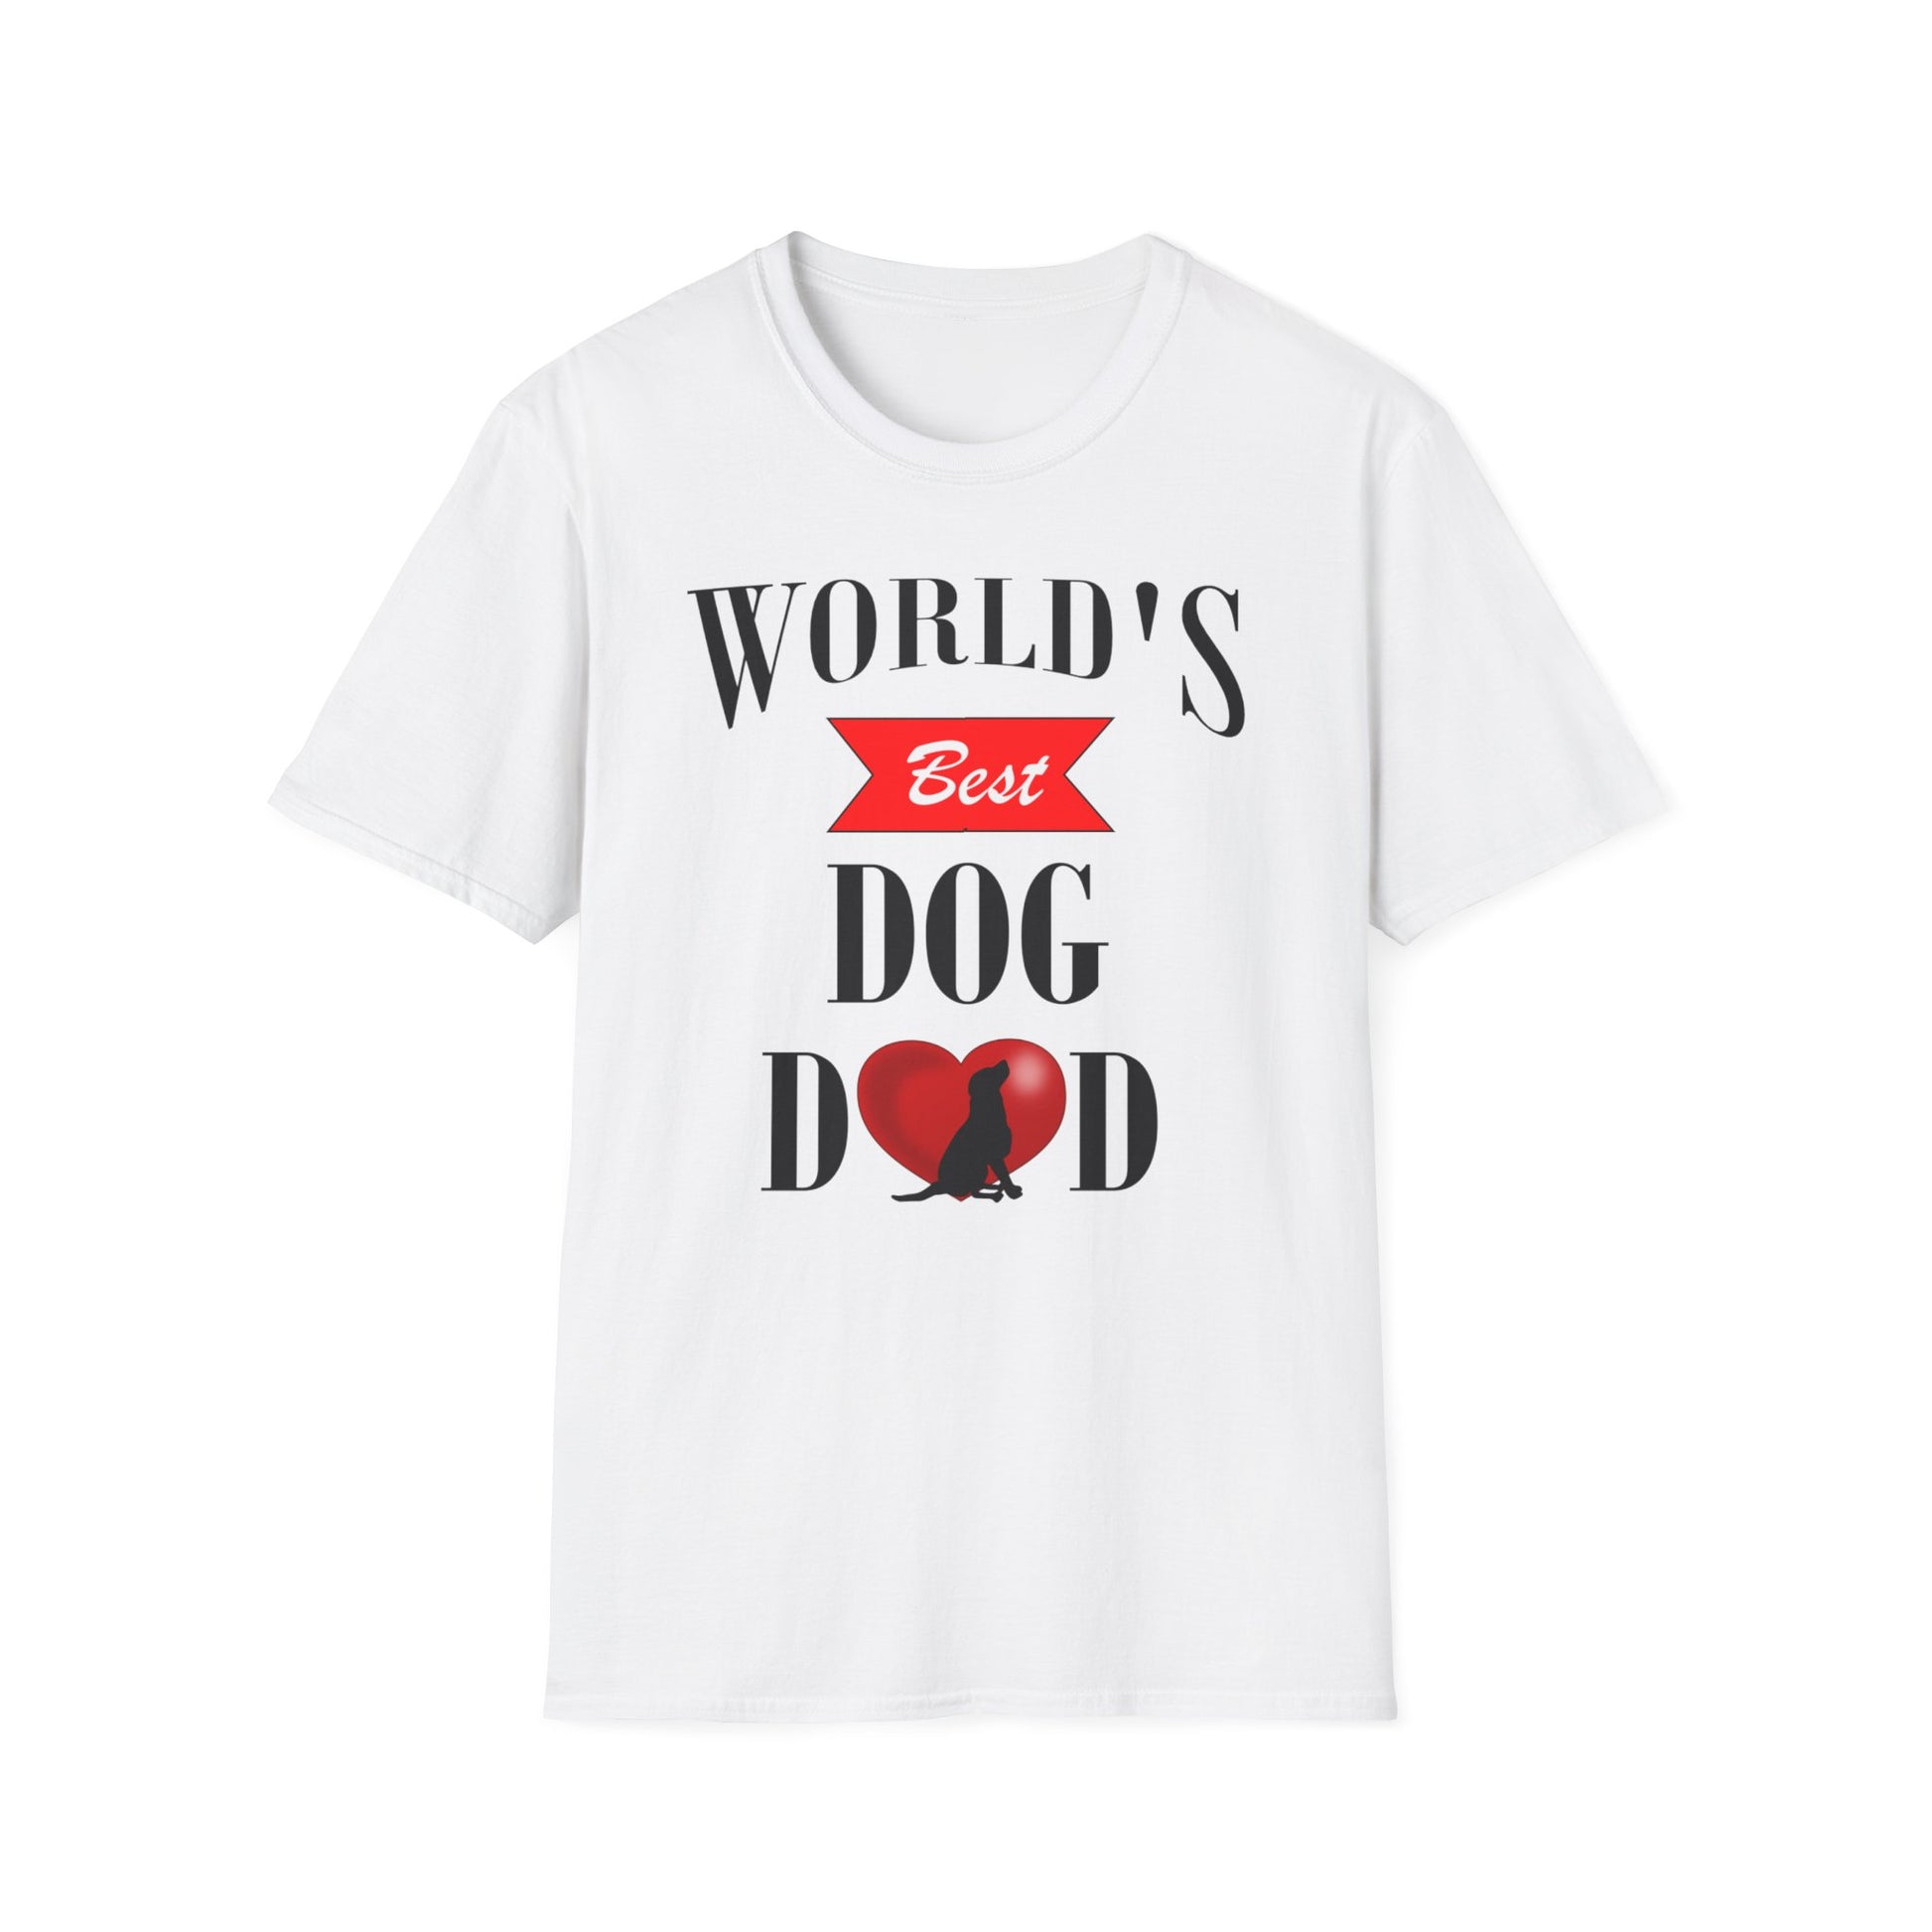 A white t-shirt with the Father's Day quote: World's Best Dog Dad. The A in Dad is a red heart with a dog.